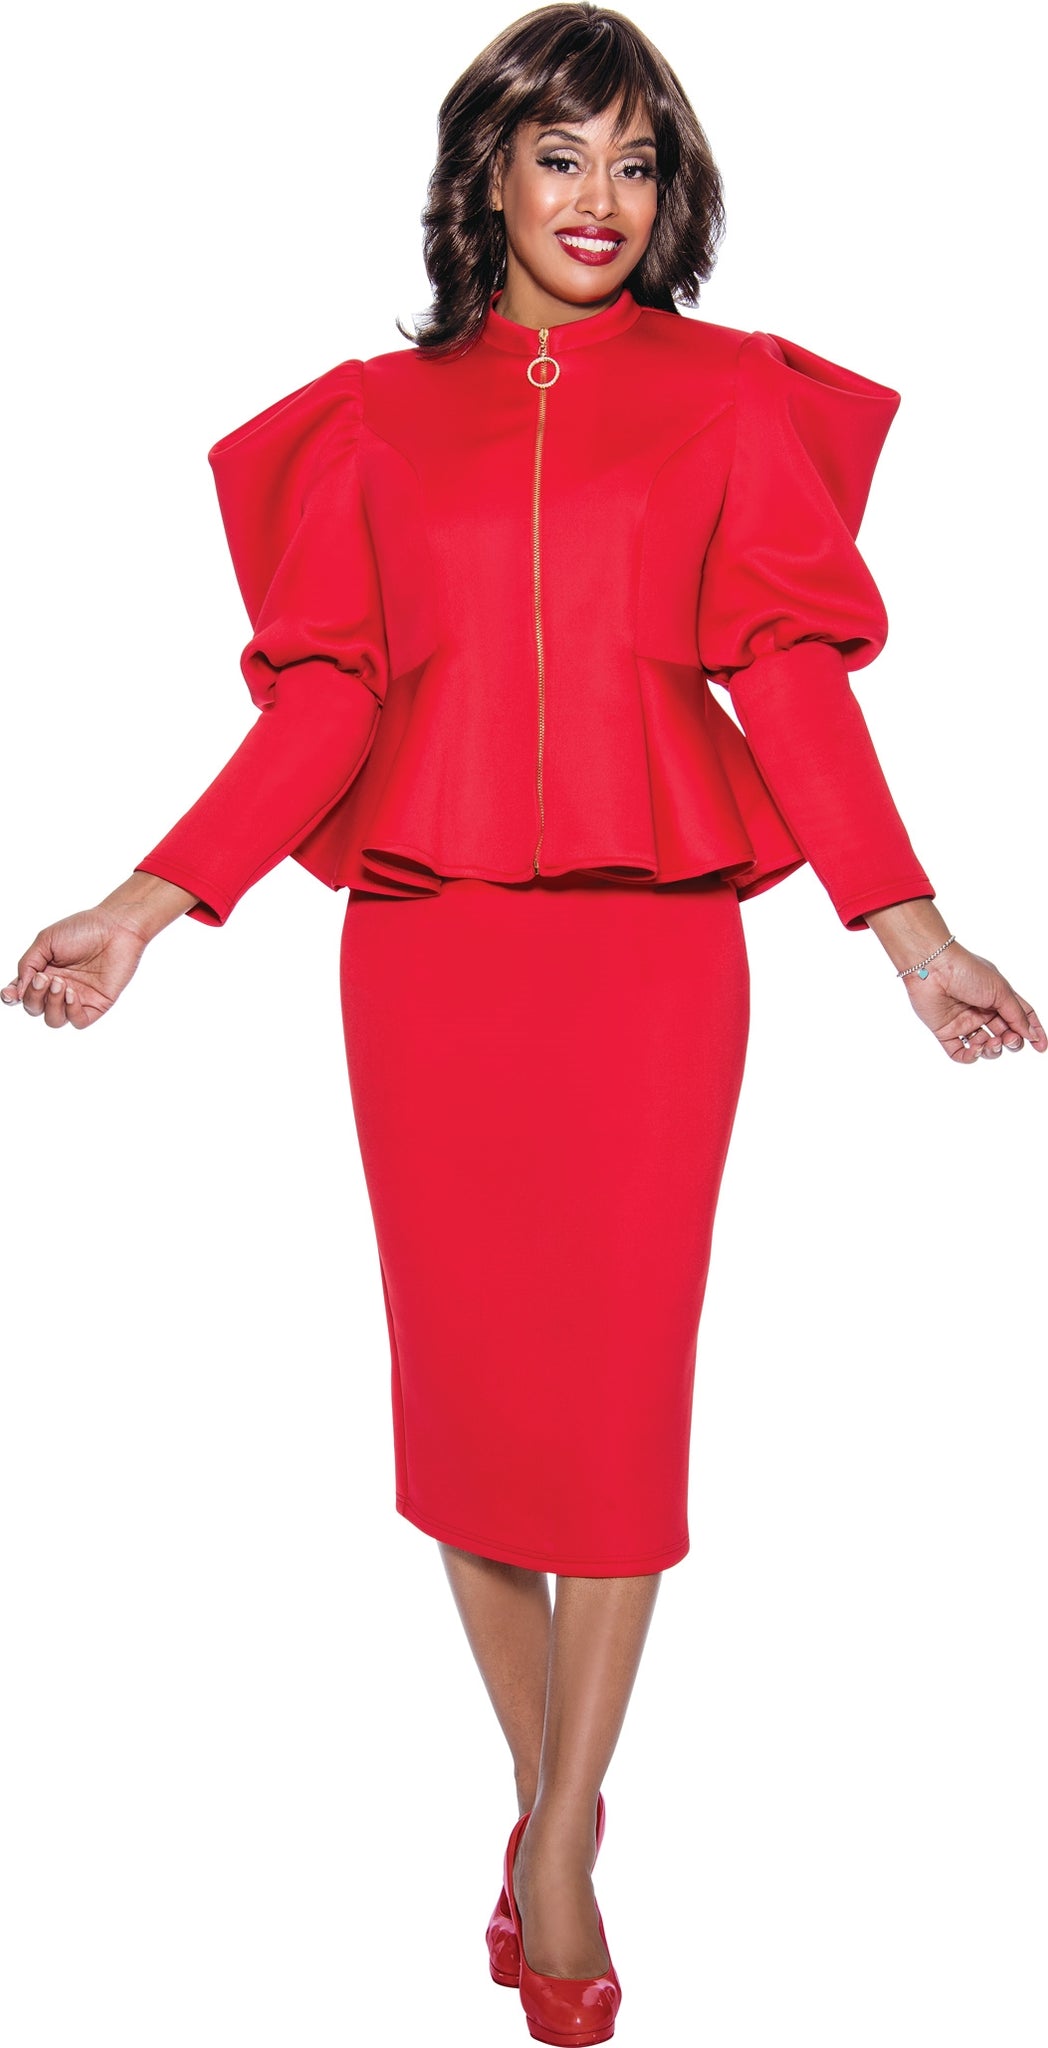 Stellar Looks Skirt Suit 1332-Red - Church Suits For Less